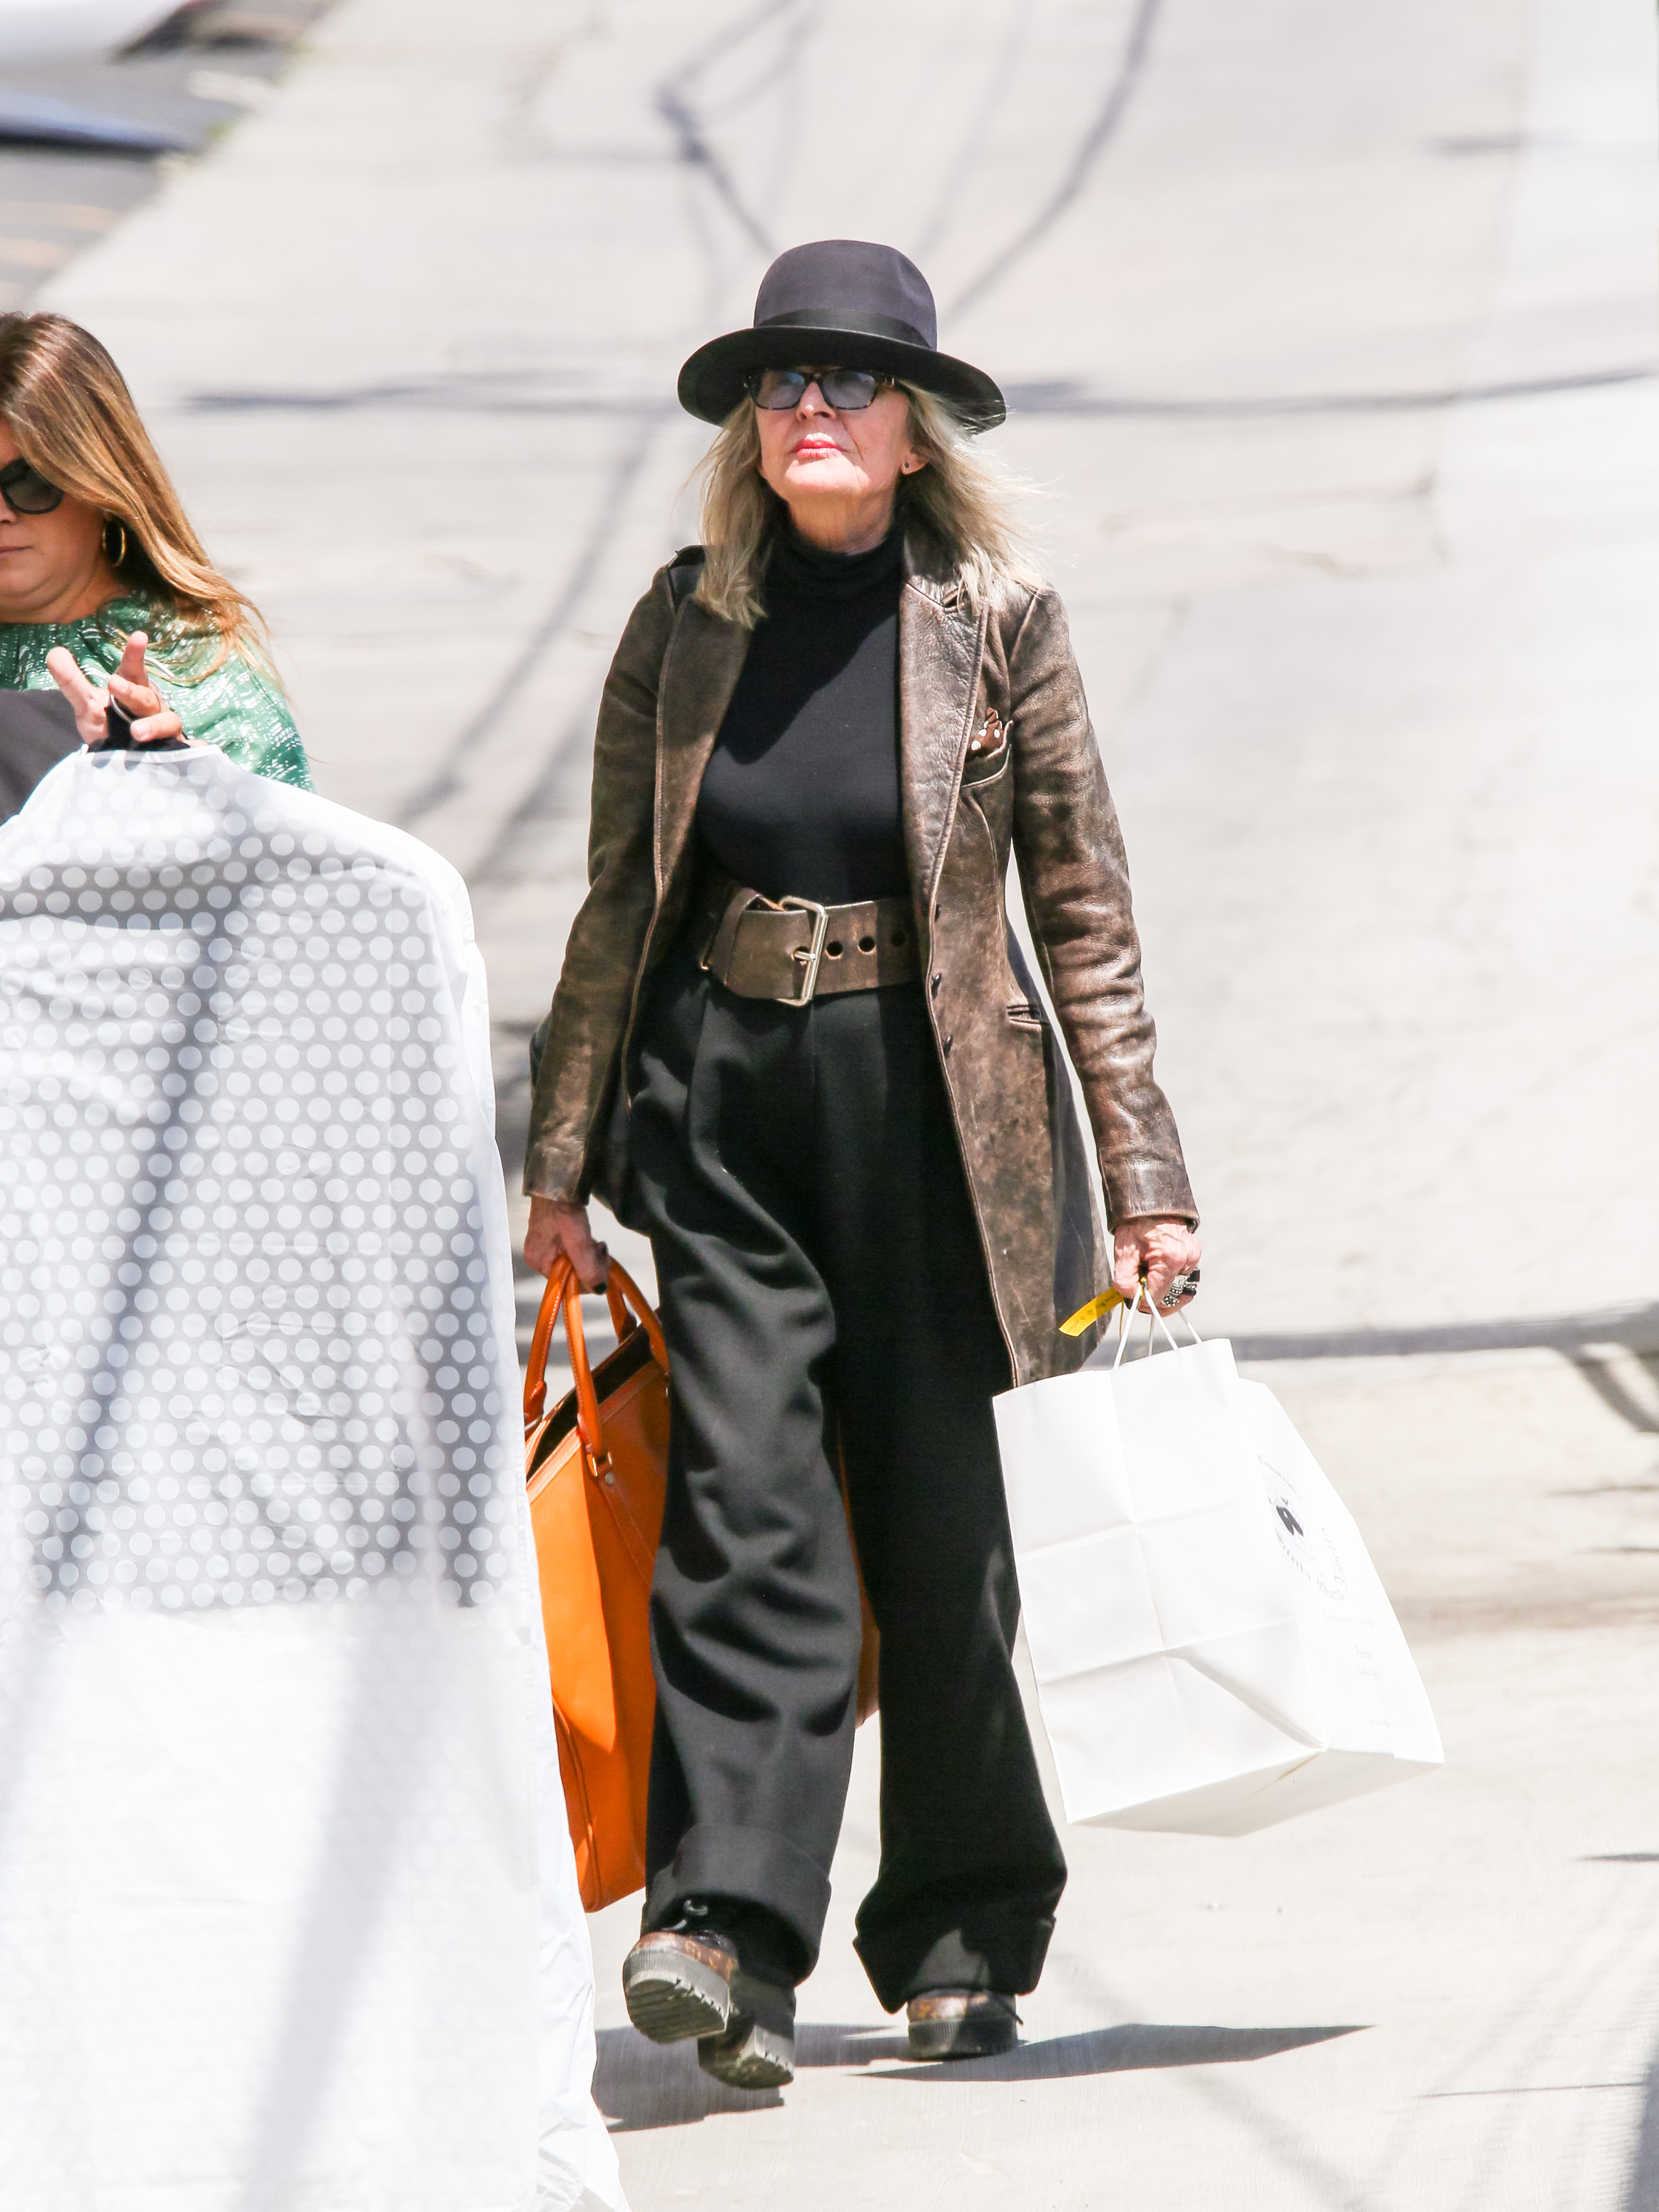 Diane Keaton in California in 2019 | Source: Getty Images